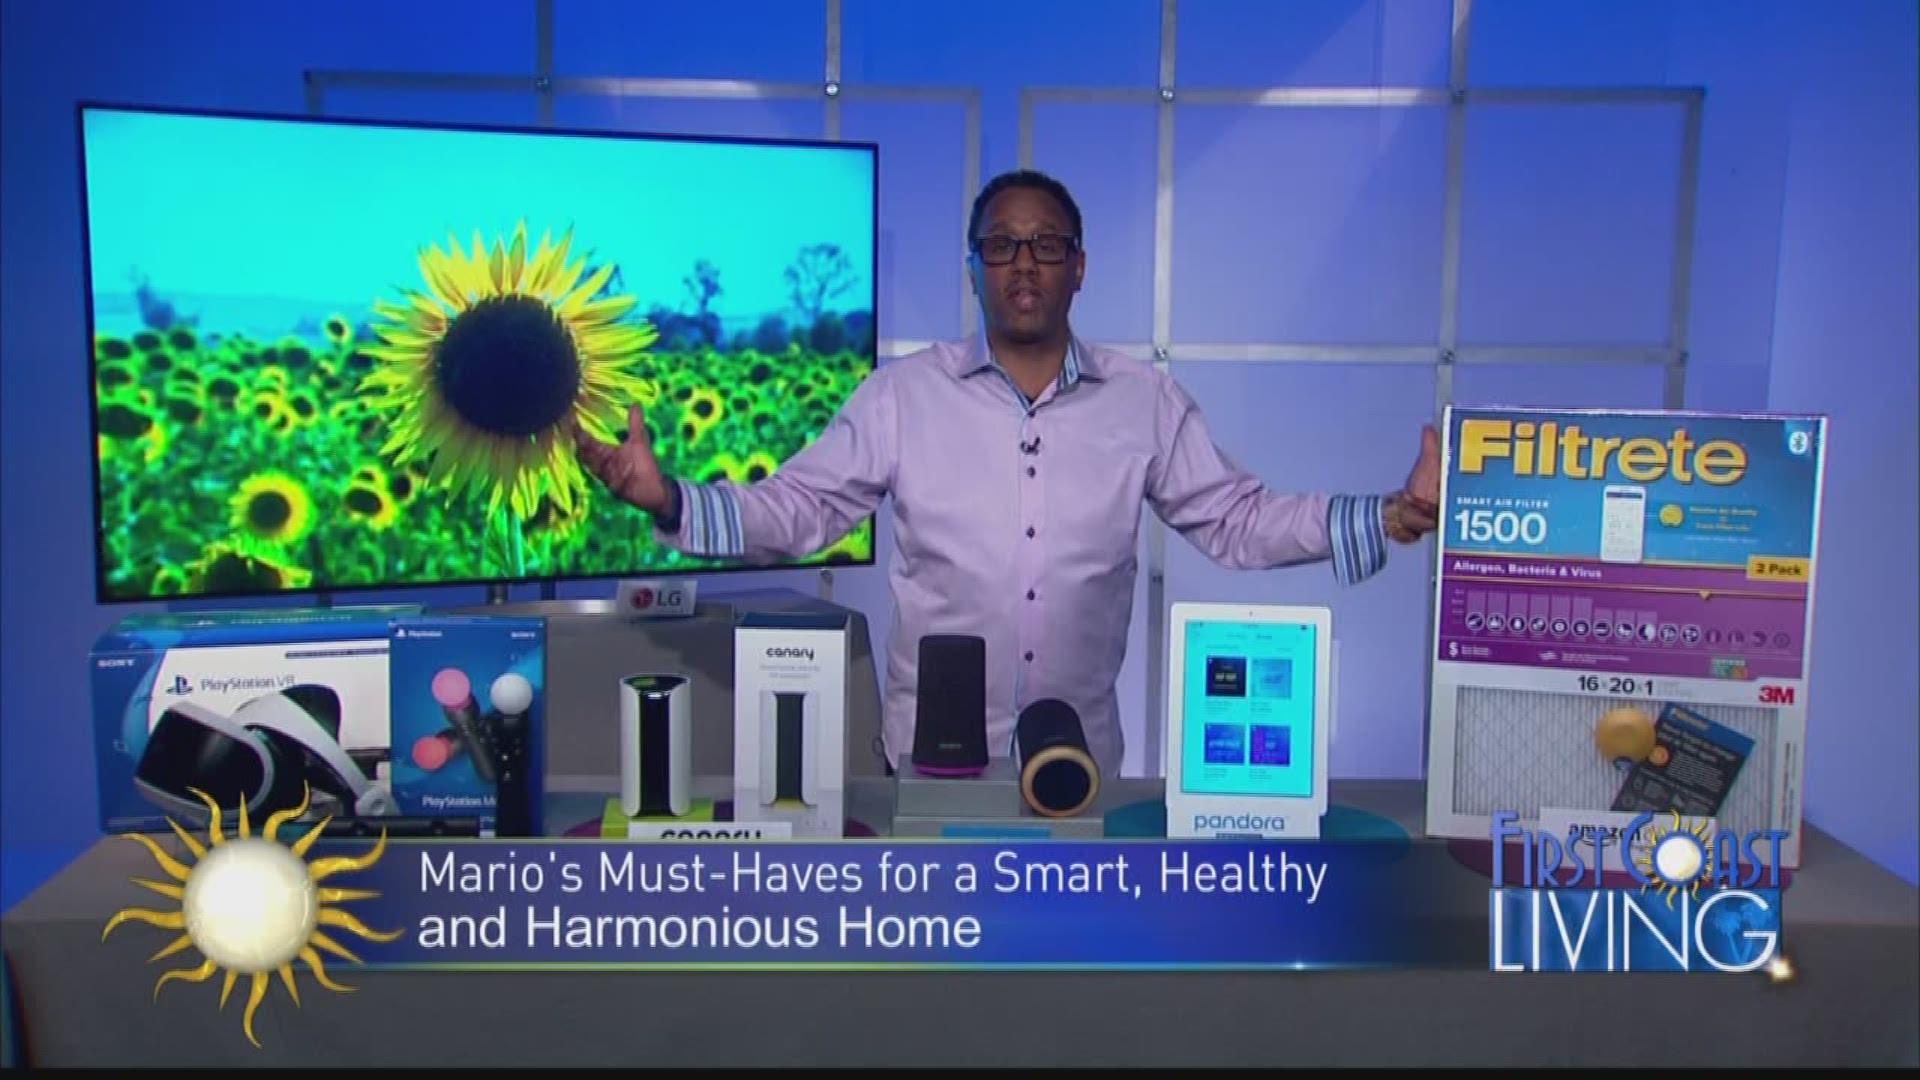 Mario brings us Must-Haves for a Smart, Healthy and Harmonious Home